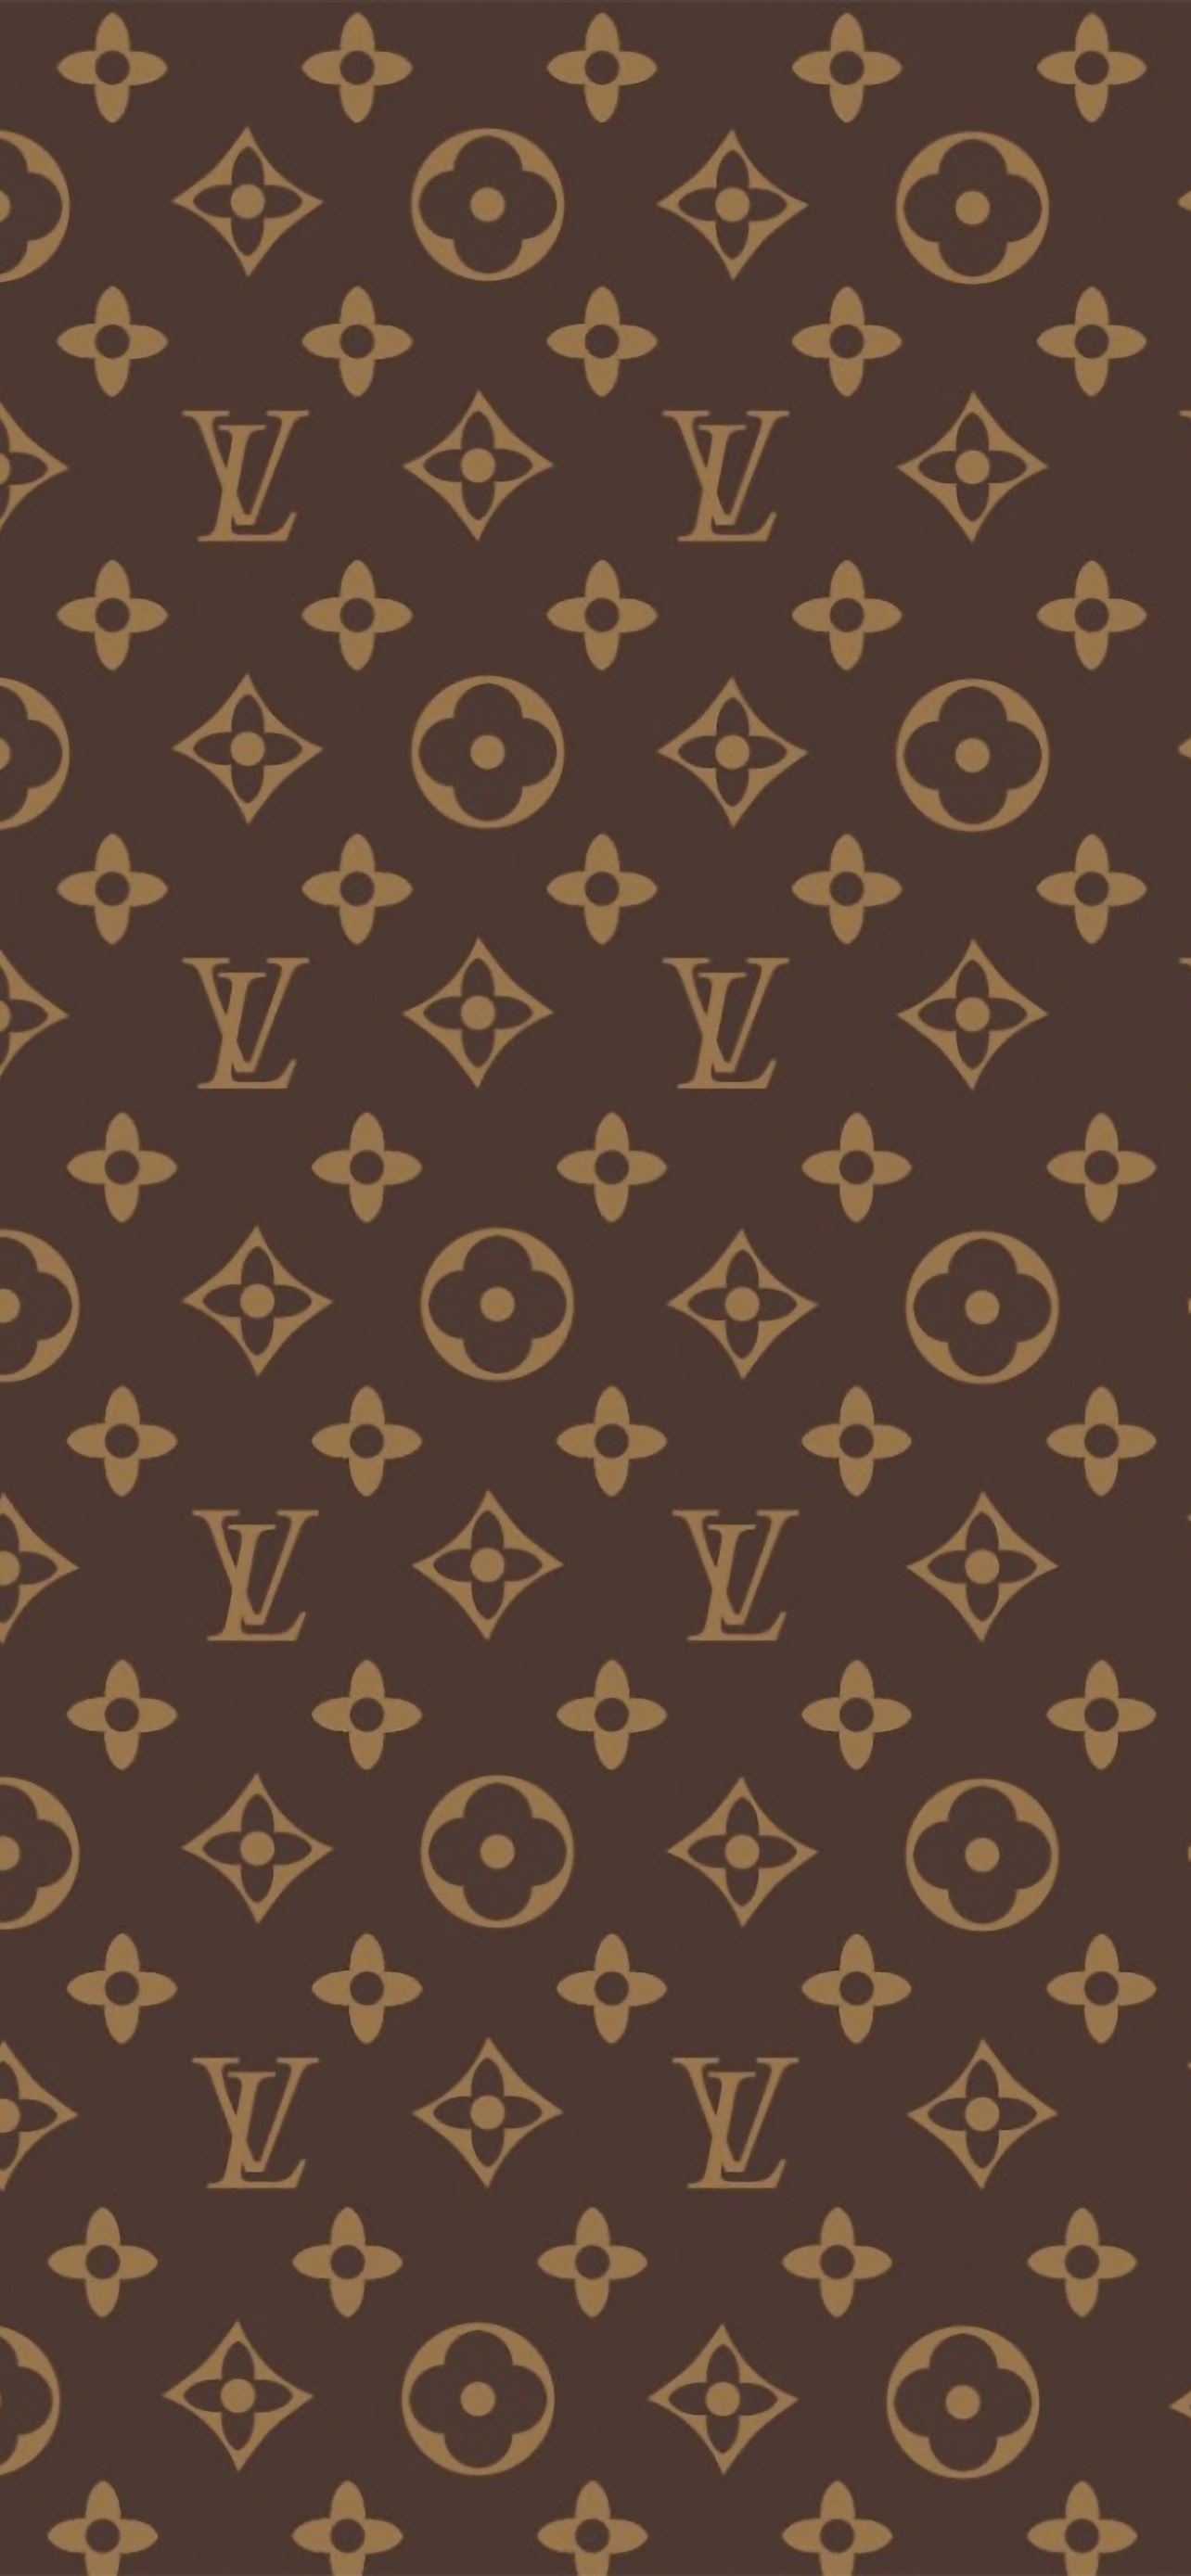 Shades of blue Louis Vuitton  Floral wallpaper iphone, Apple